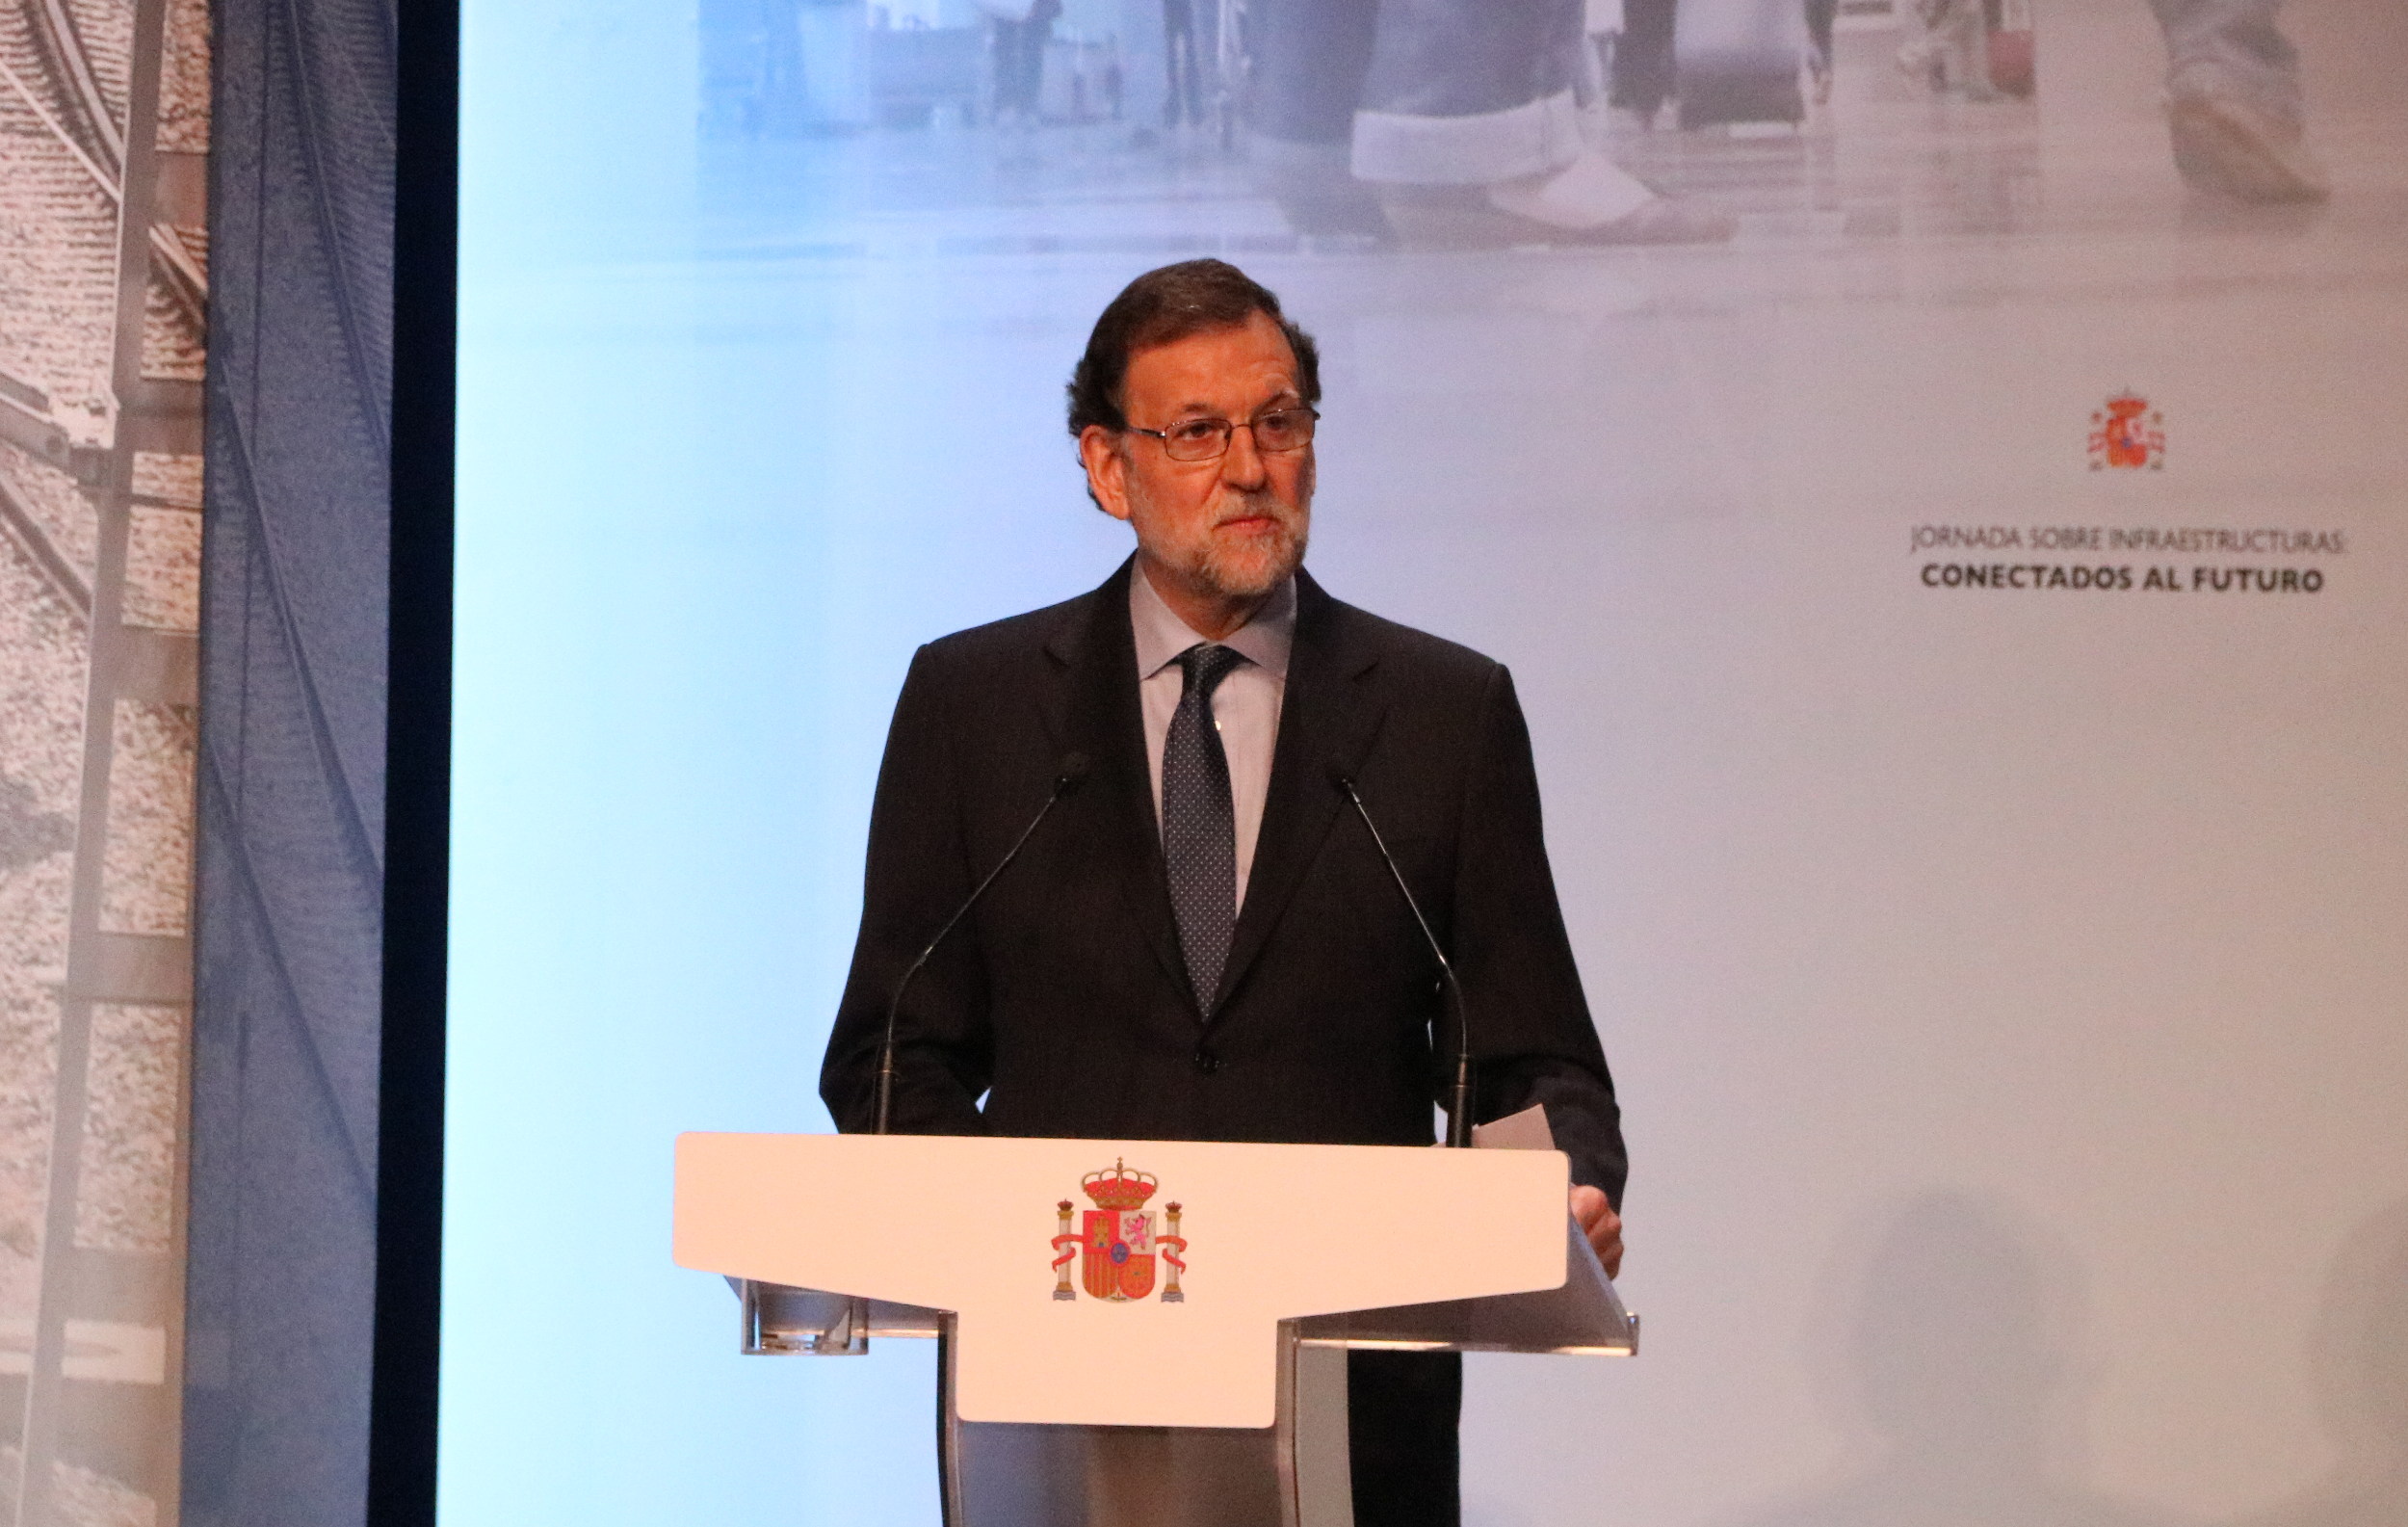 Spanish President, Mariano Rajoy, during the conference 'Connected to the future' in Barcelona (by ACN)